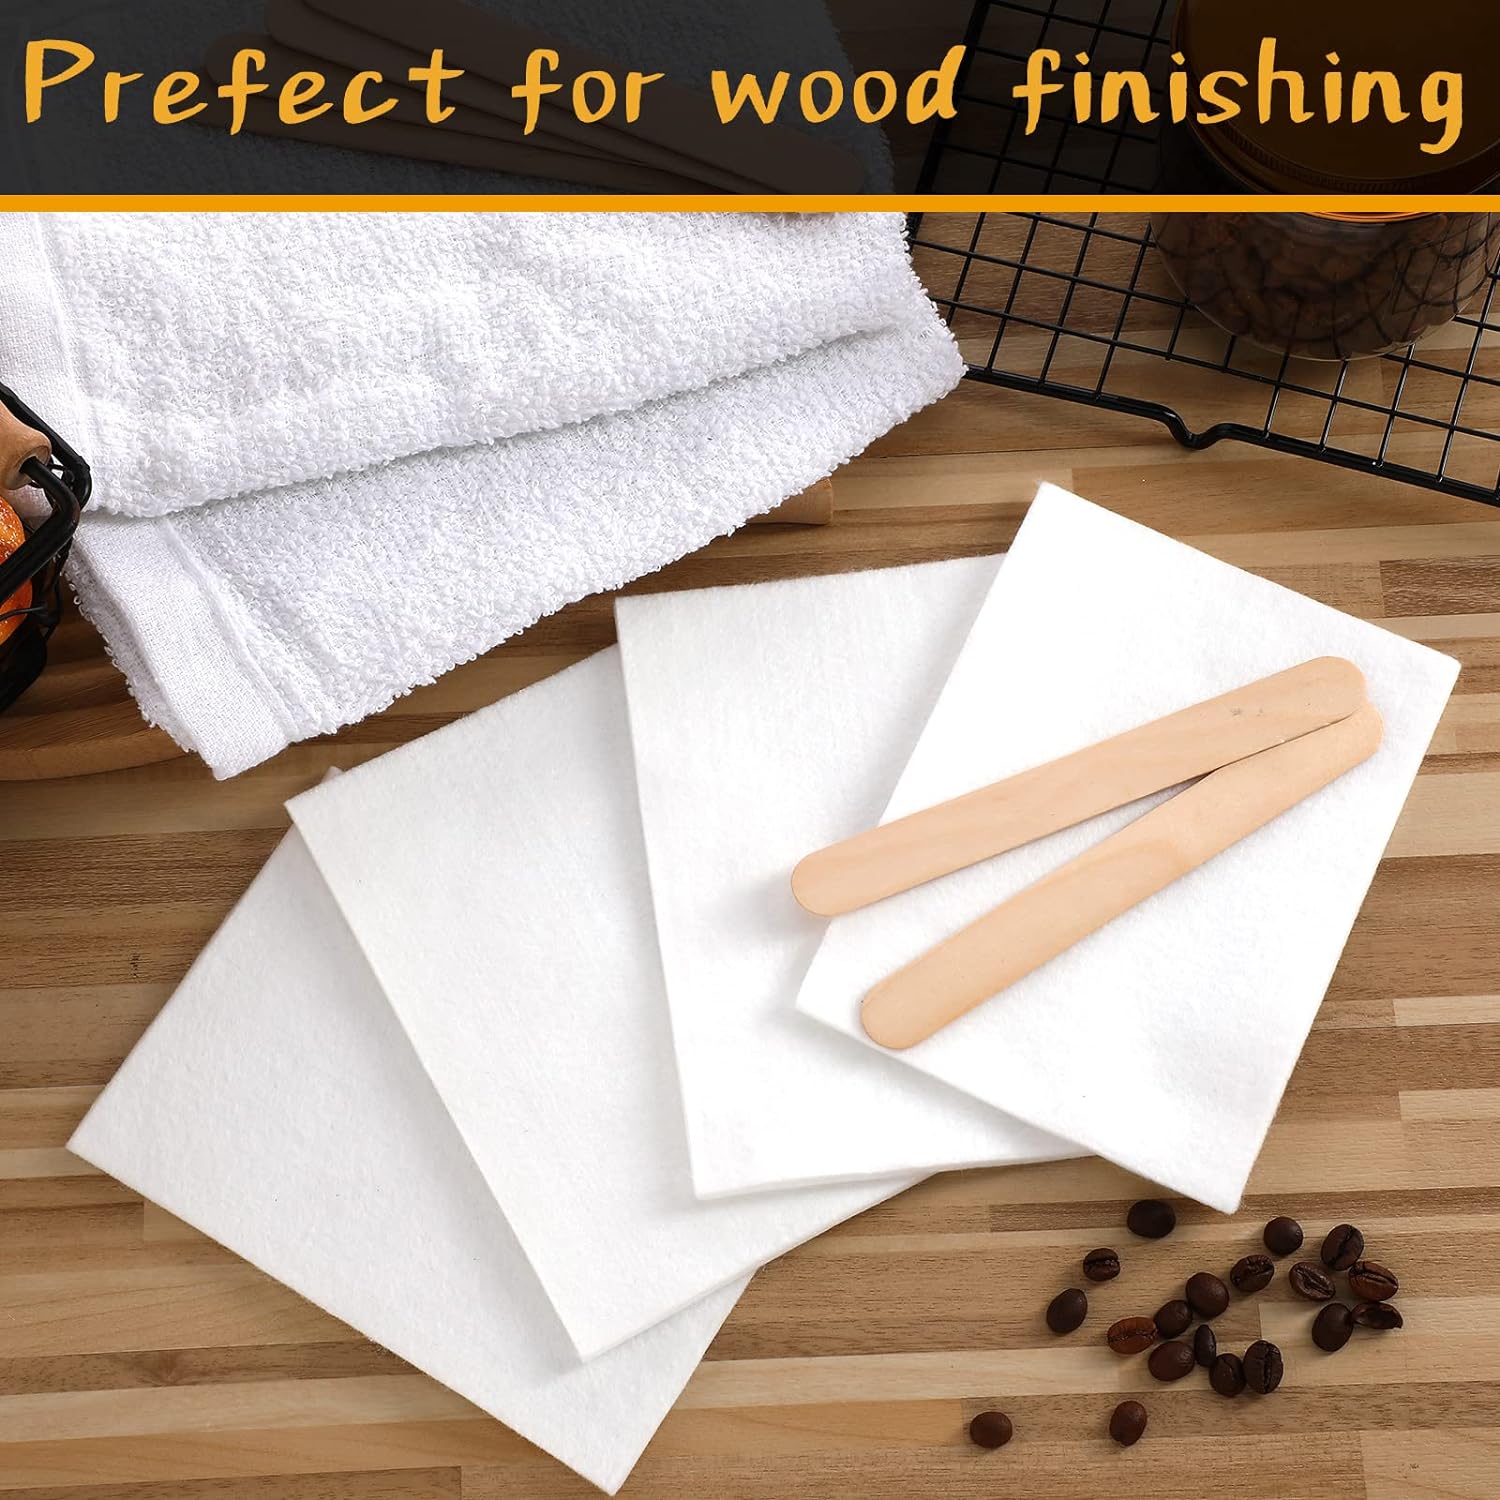 27 Pieces Wood Wax Applicator, Includes 15 White Non-Woven Pads 2 Terry Cloth Buffing Towels and 10 Stirring Sticks for Polishing Cutting Board and Multi Purpose Use in Home : Health & Household